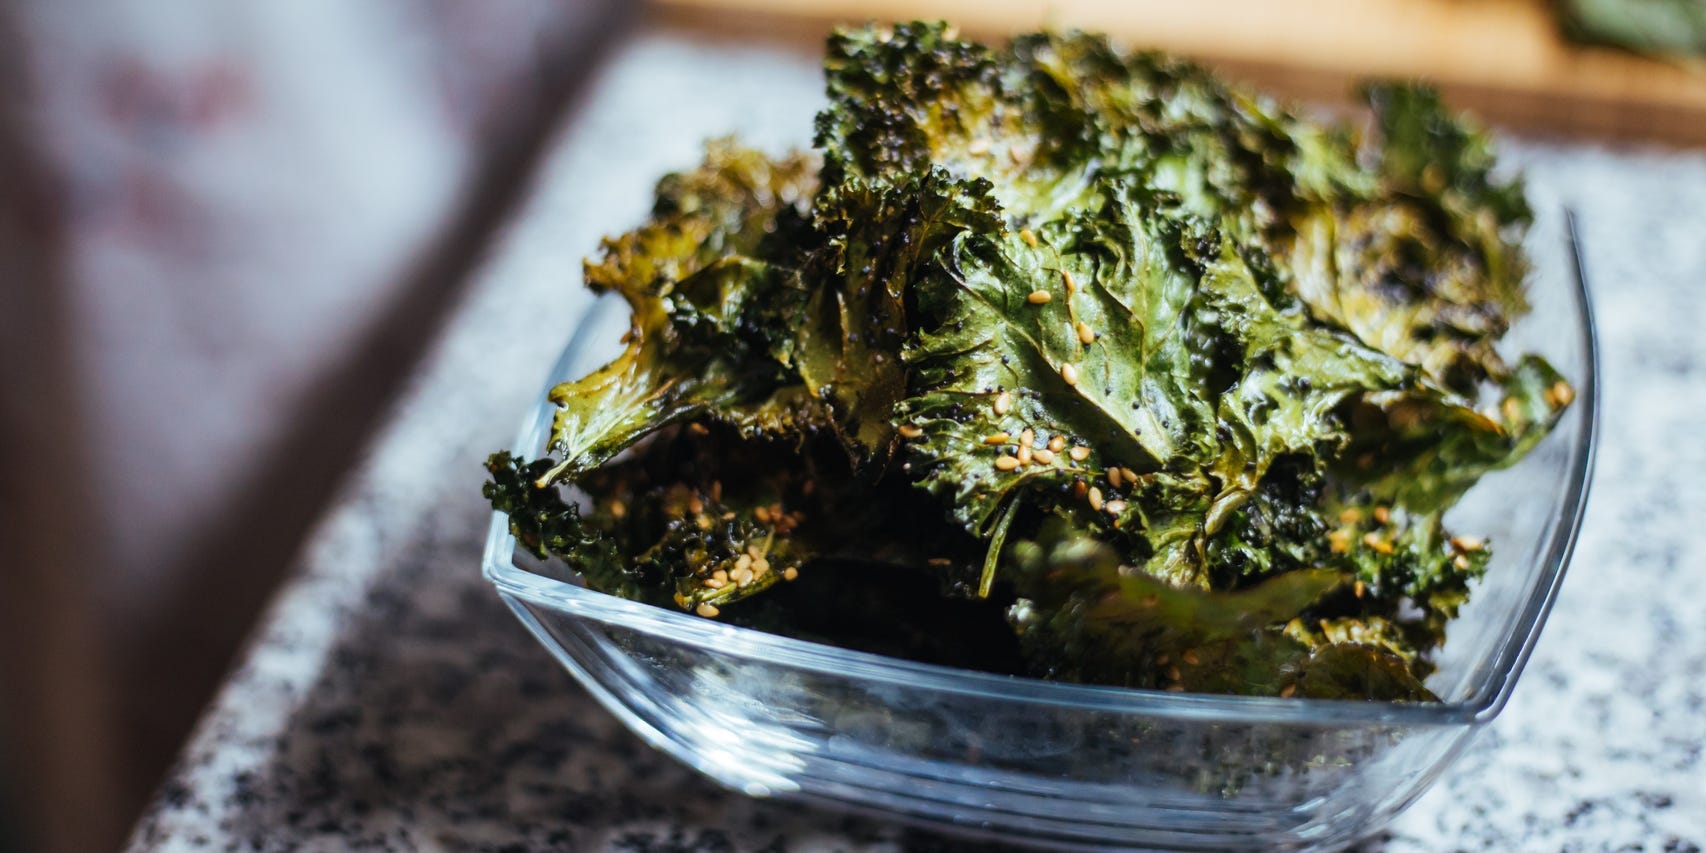 kale chips in a bowl on a countertop